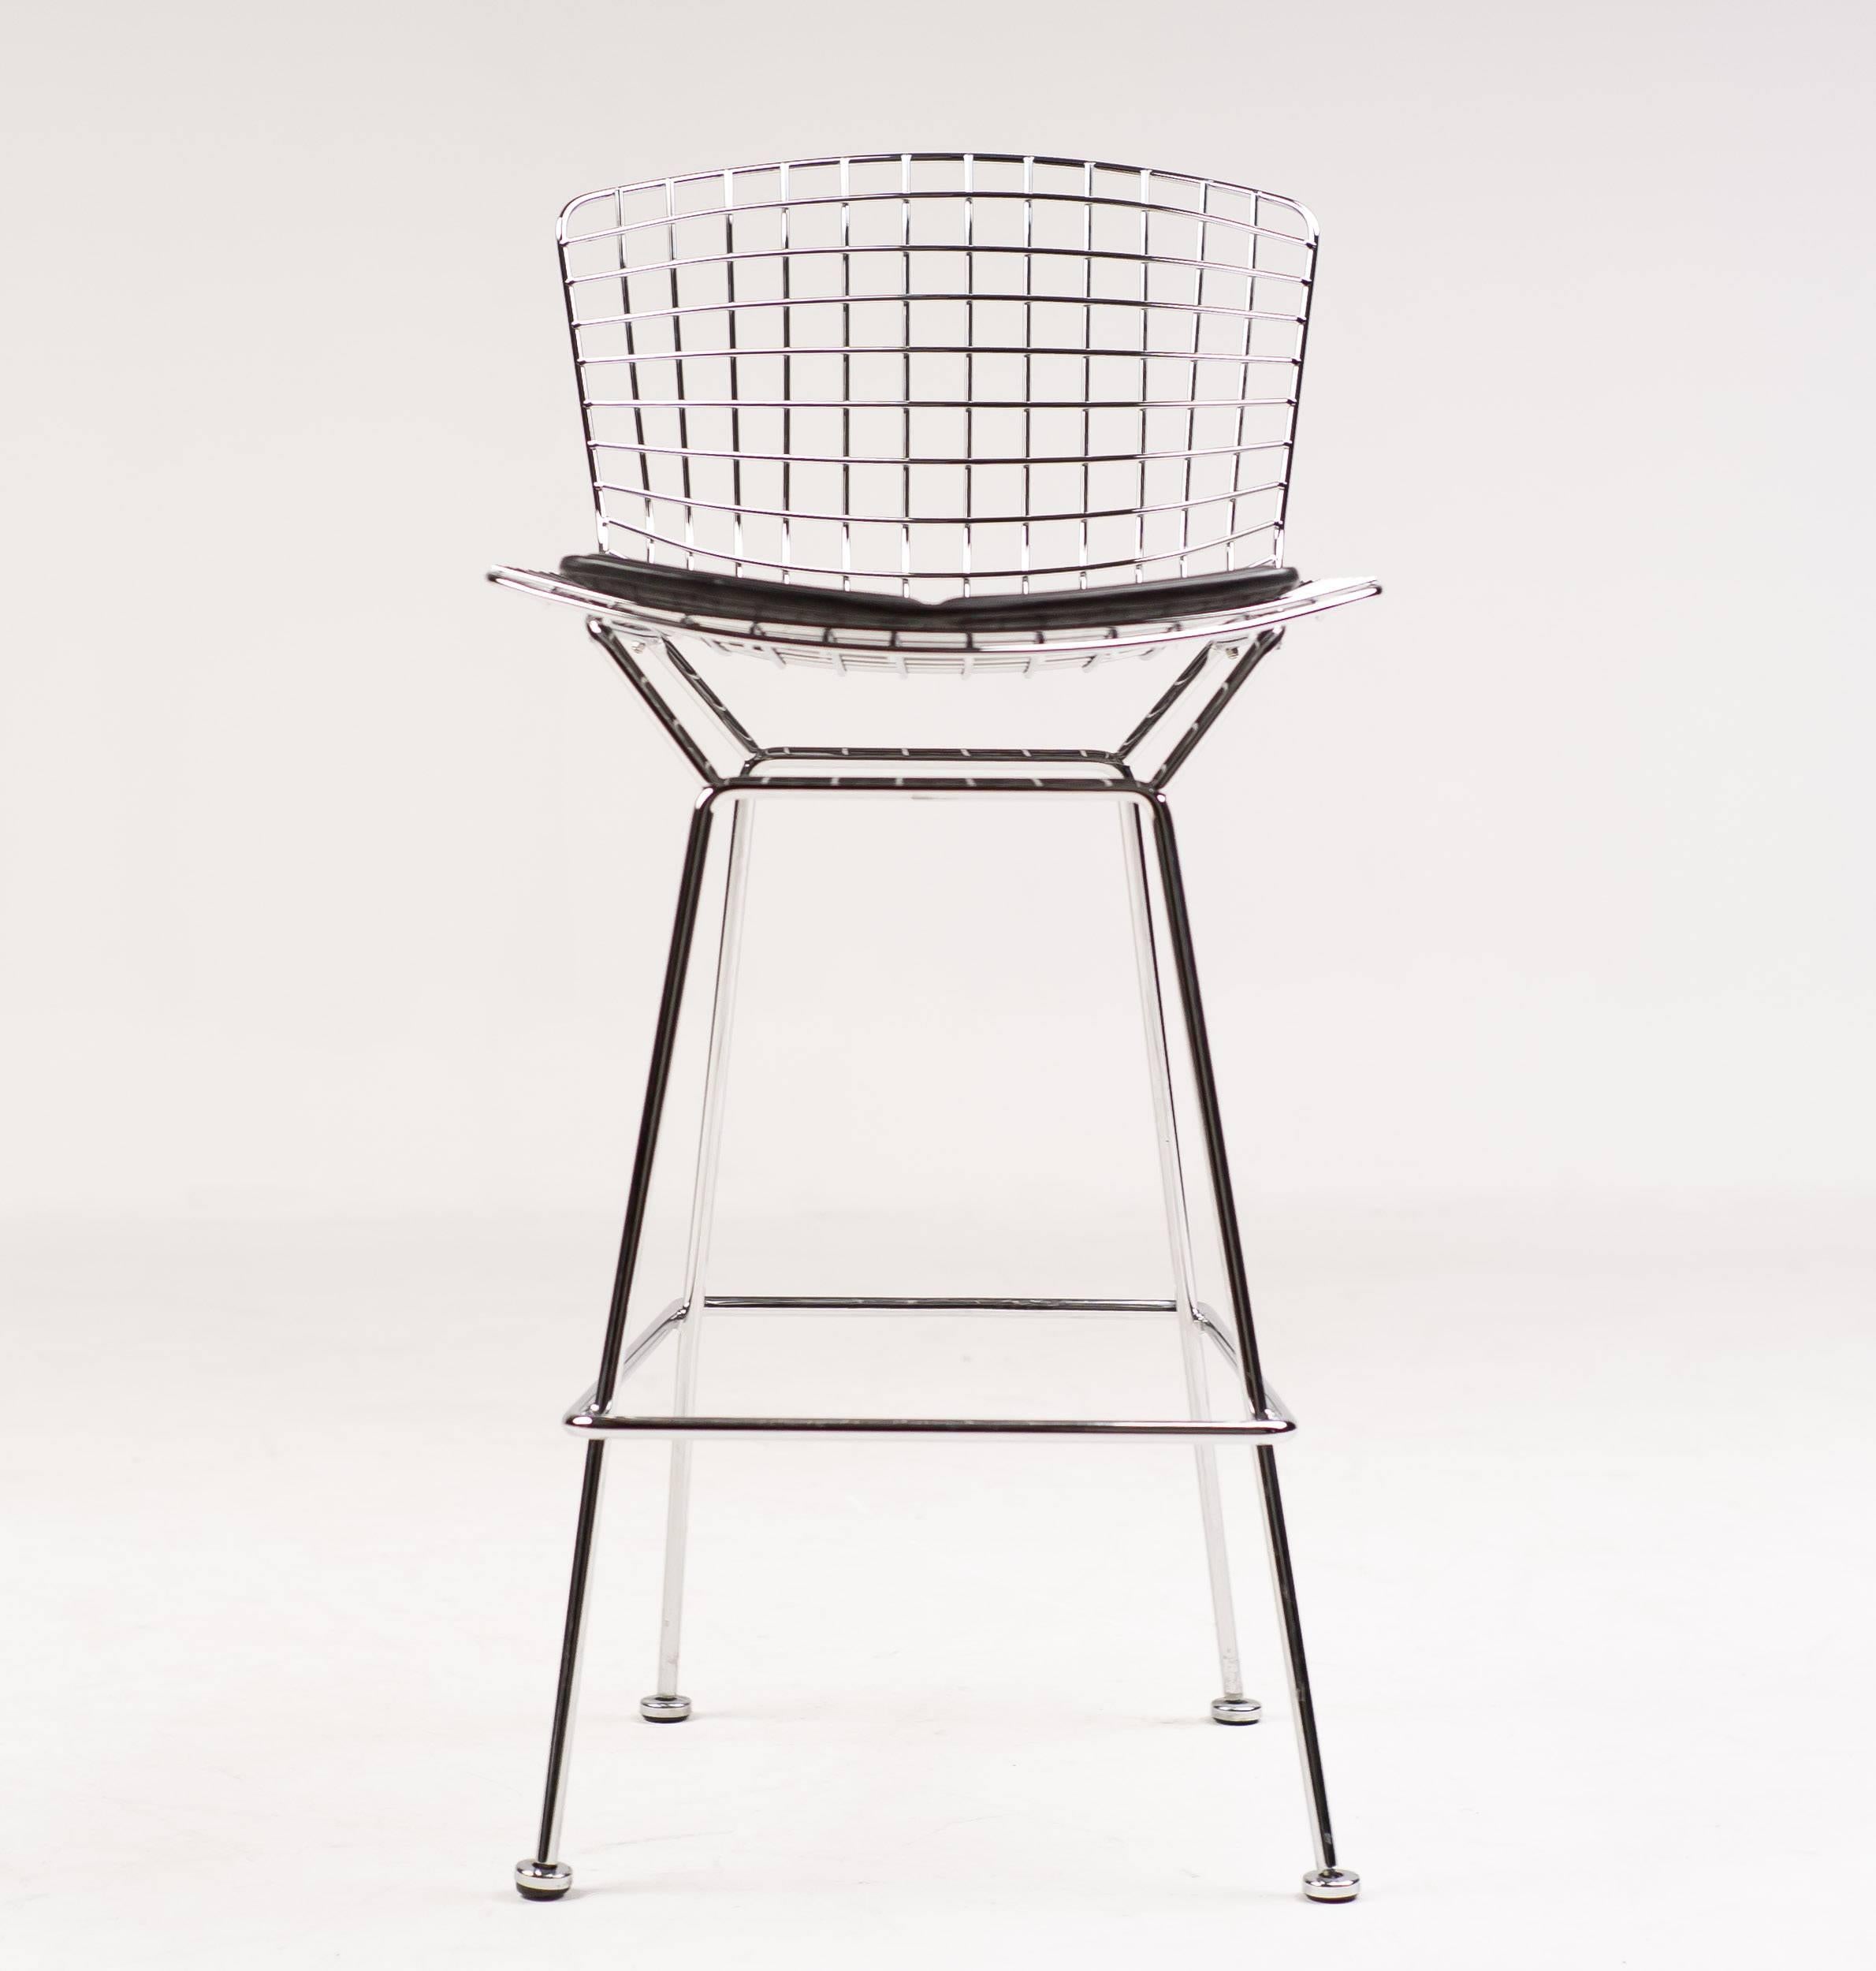 Set of ten counter chairs (as these are proper chairs) by Harry Betoia for Knoll International with black leather seat pads.
In Bertoia's own words; 'If you look at these stools, they are mainly made of air, like a sculpture. Space passes right